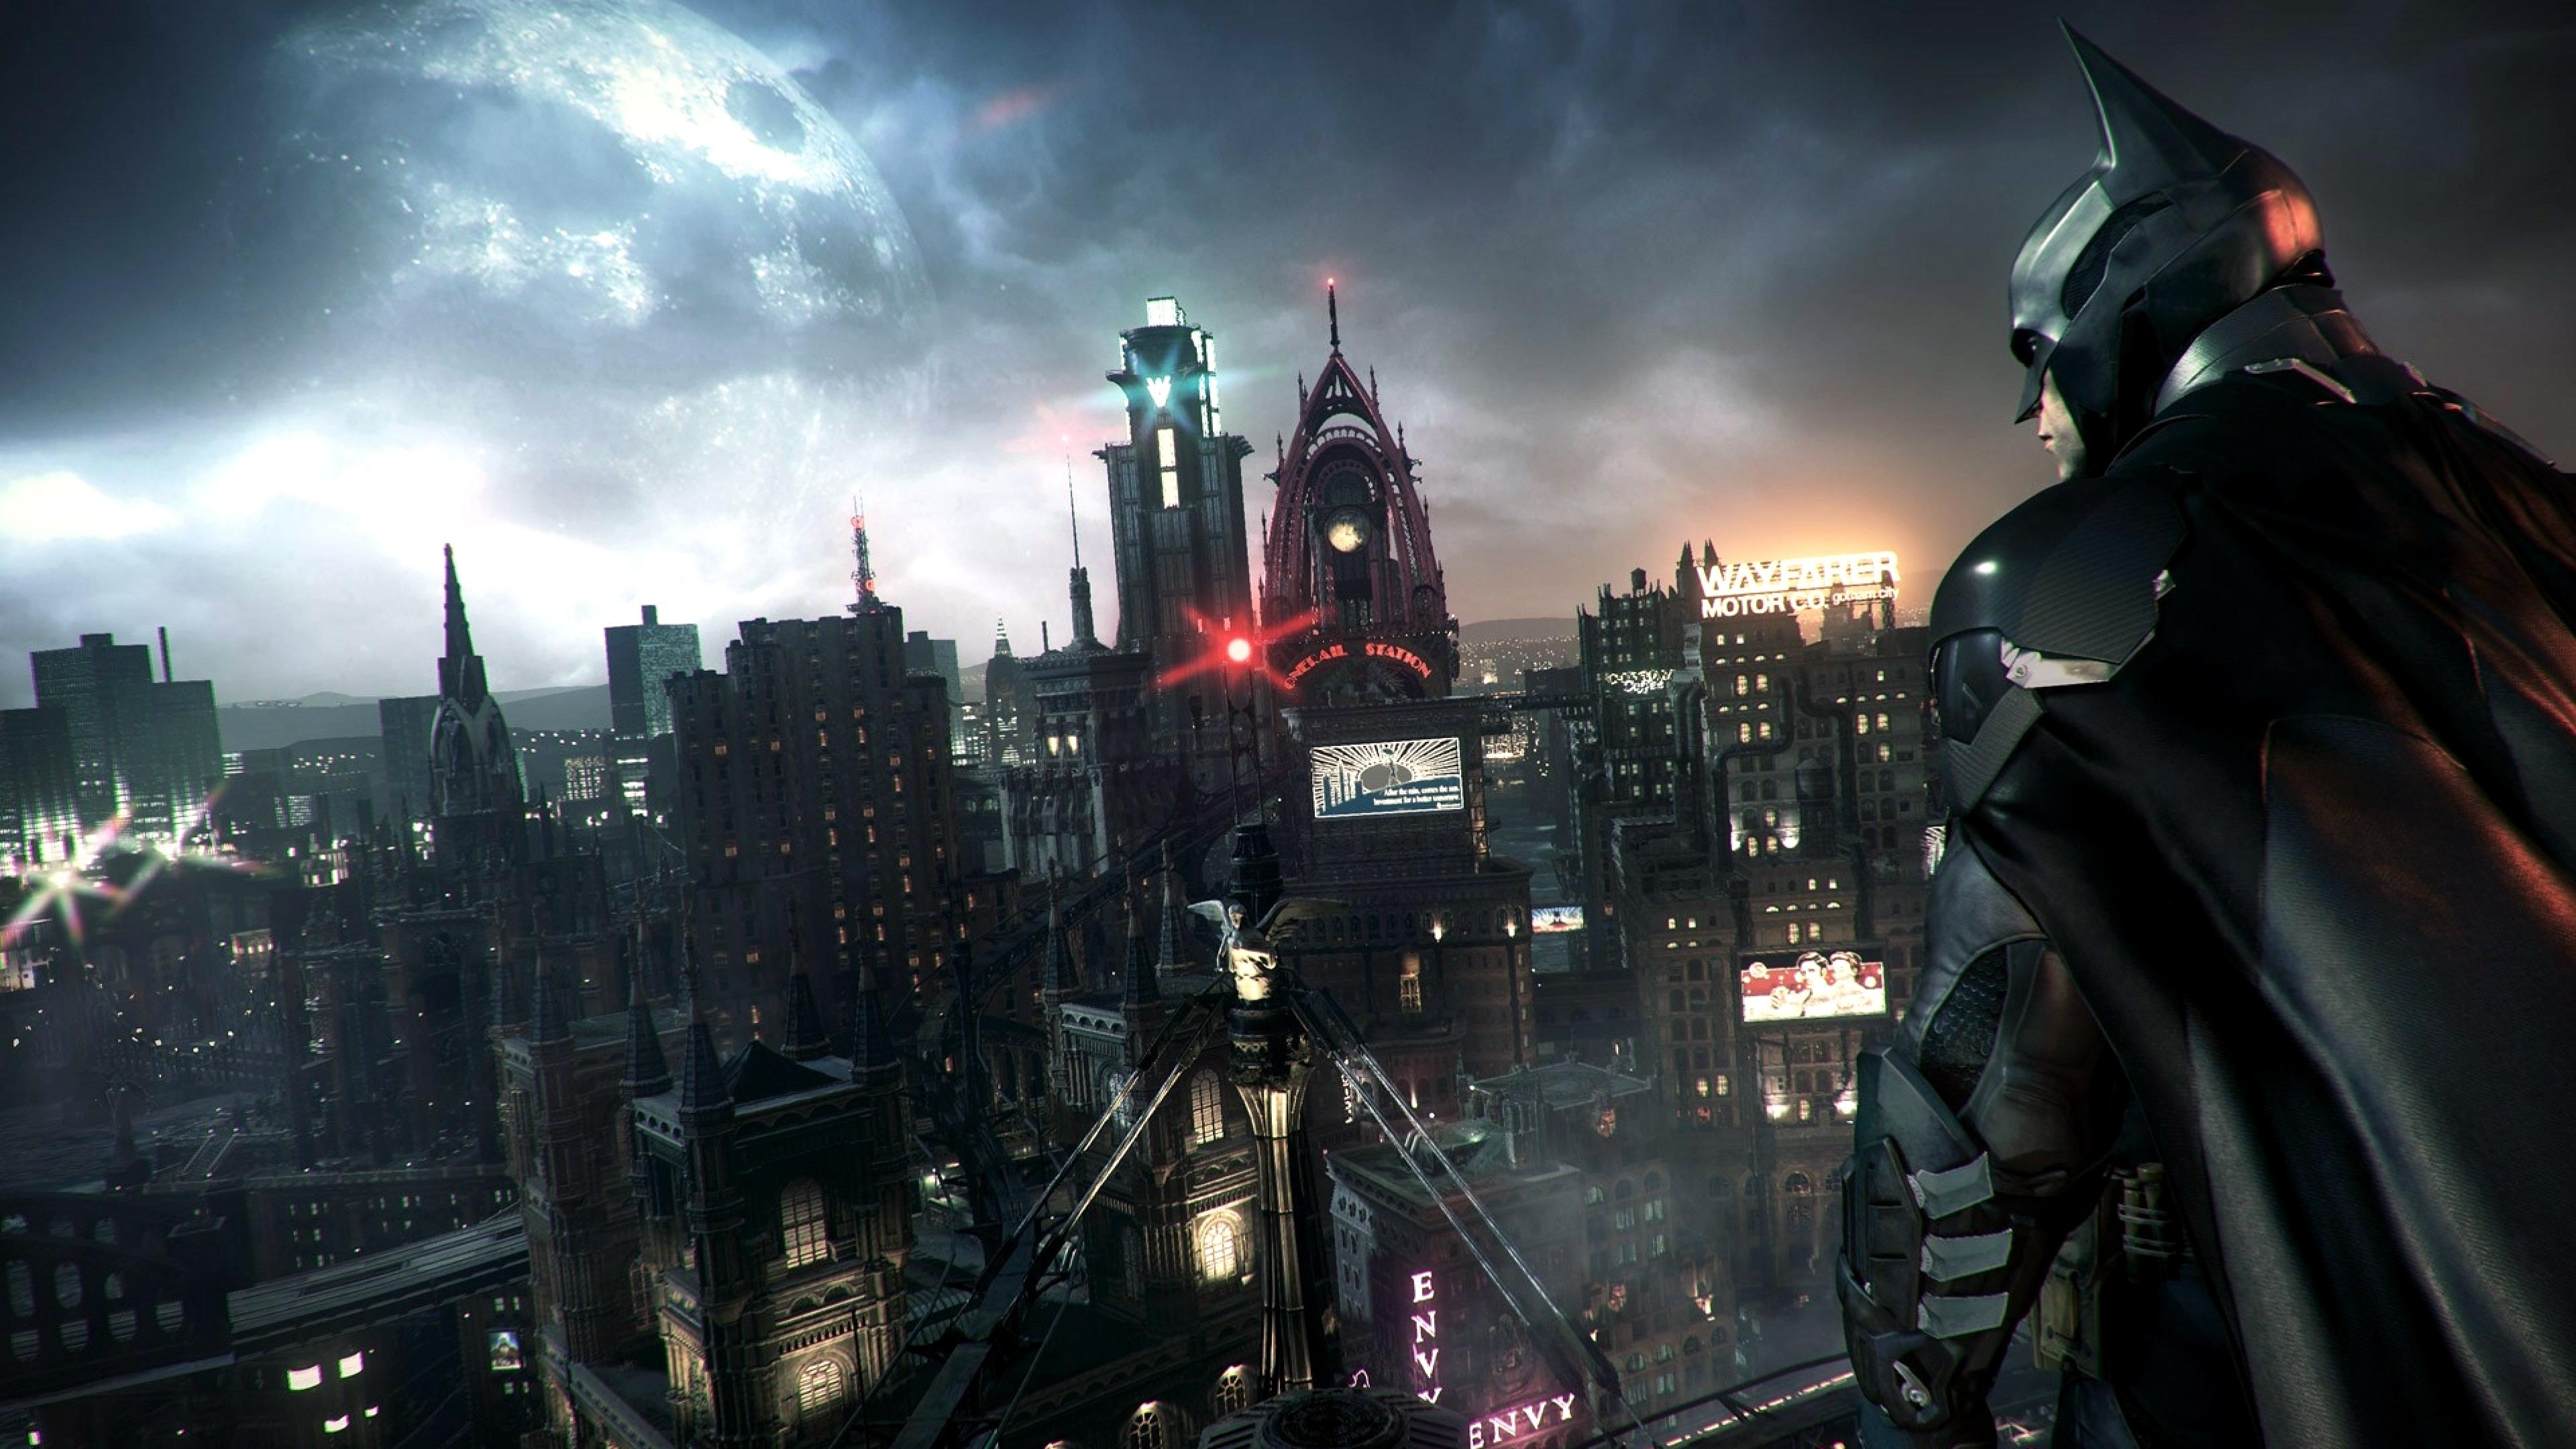 Gotham City movies, Stunning 4K gaming wallpapers, Action-filled video game scenes, 3840x2160 4K Desktop